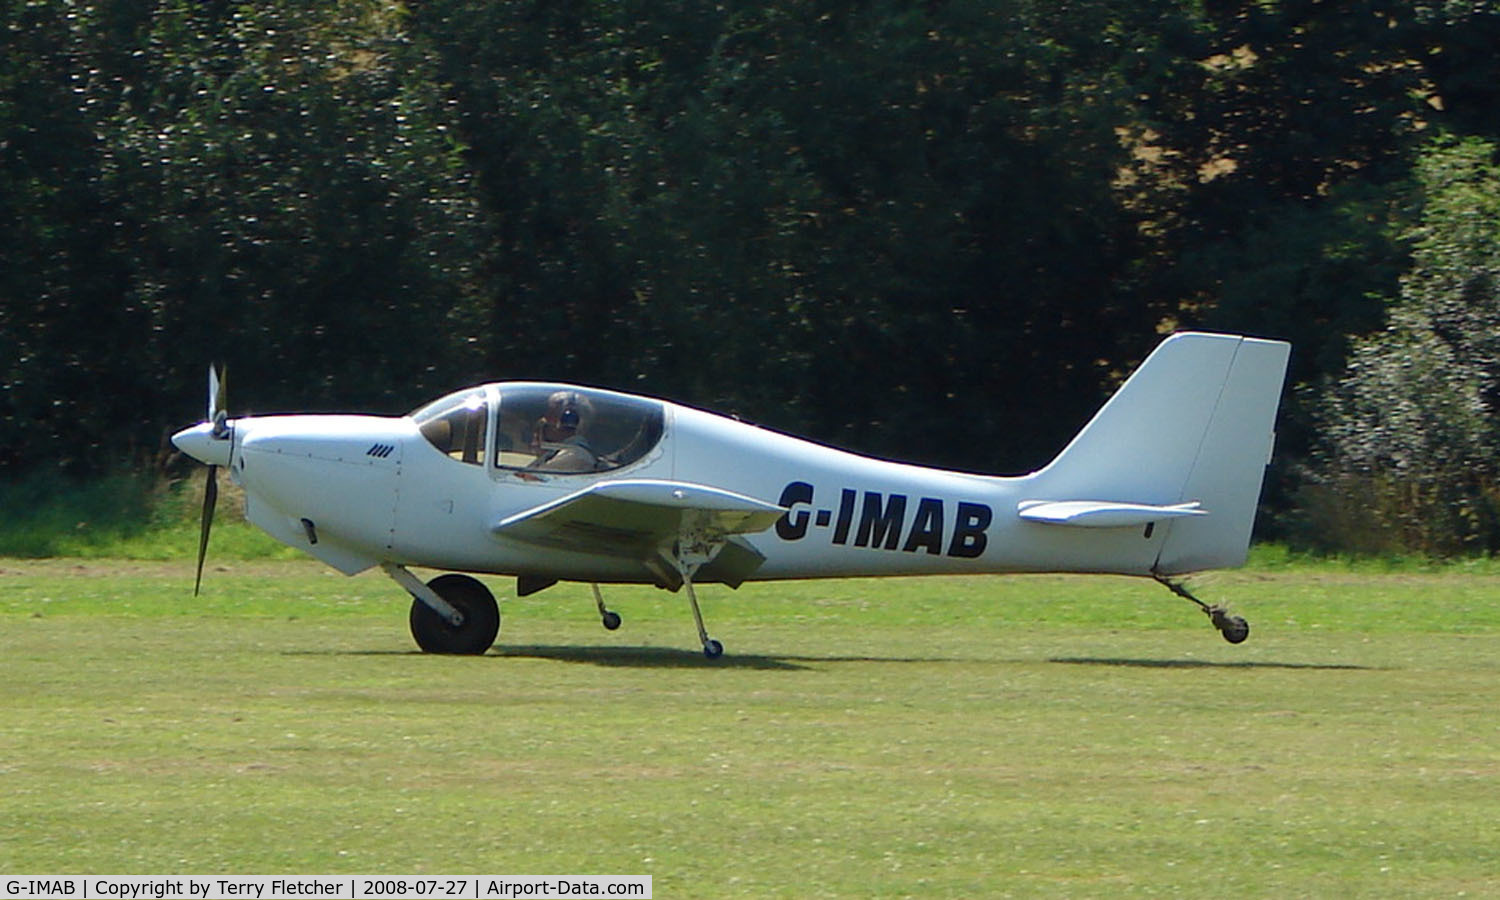 G-IMAB, 2002 Europa XS Monowheel C/N PFA 247-13128, Europa XS - a visitor to Baxterley Wings and Wheels 2008 , a grass strip in rural Warwickshire in the UK